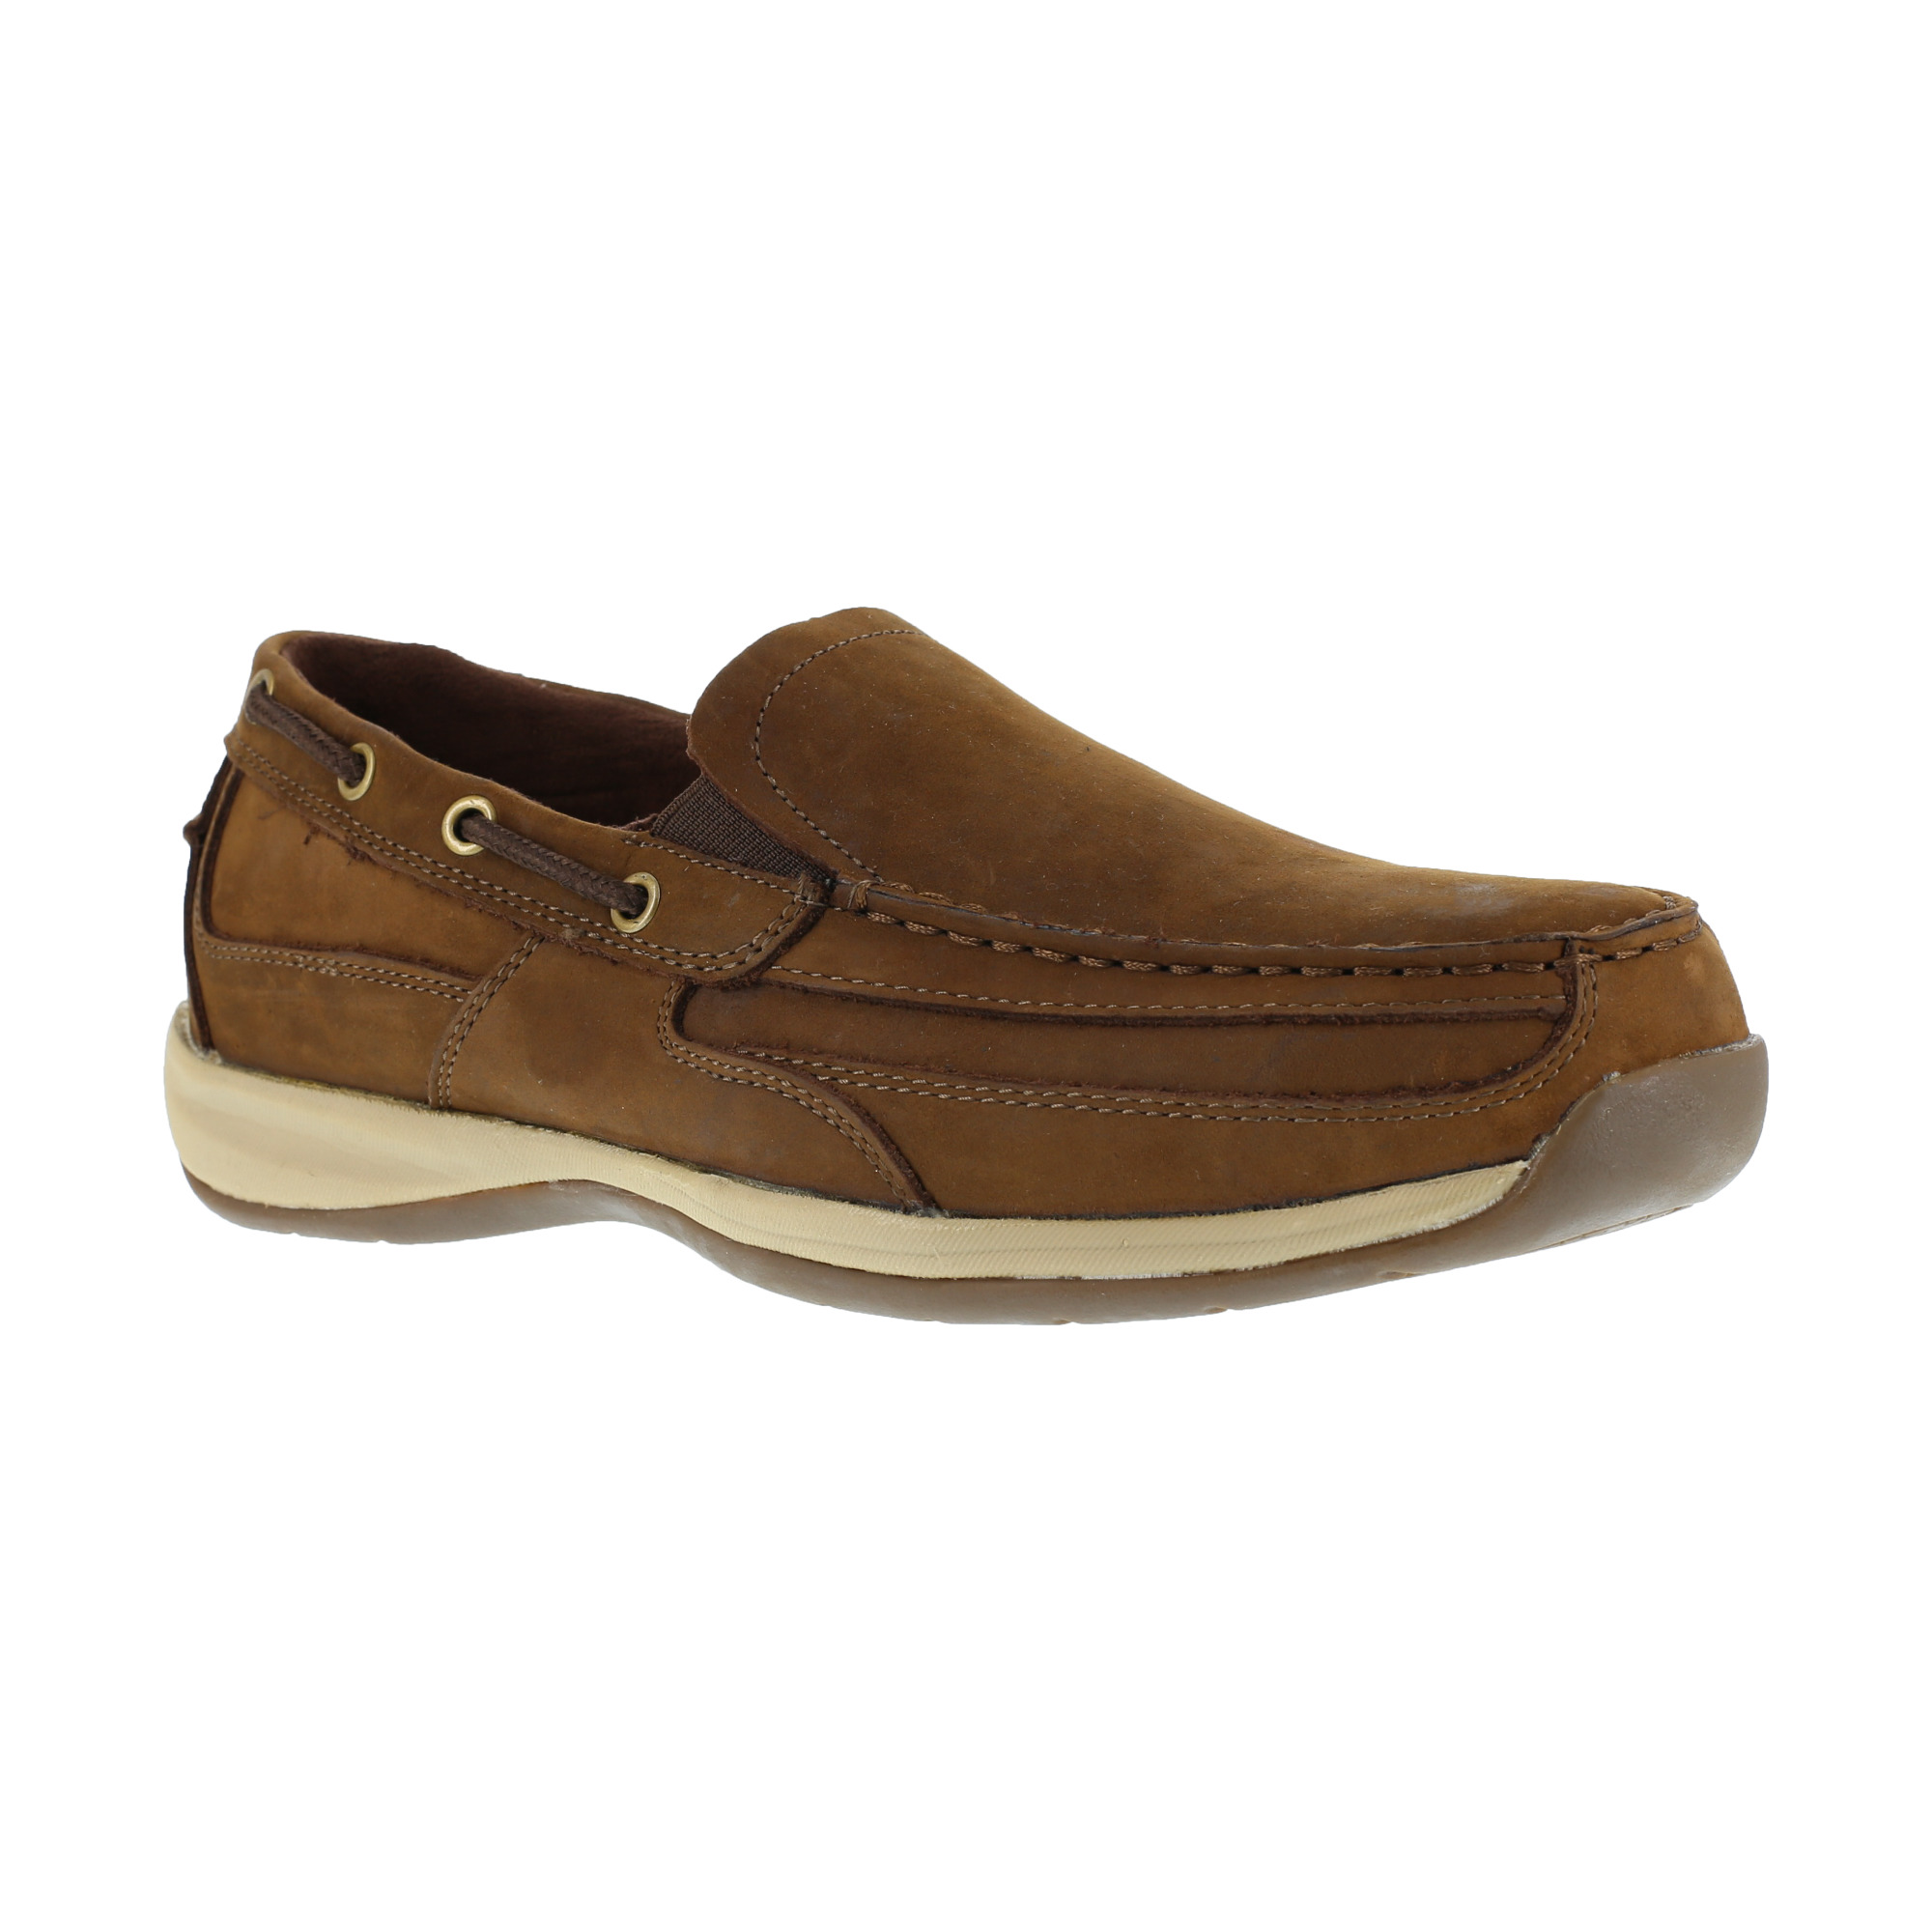 mens boat shoes 219